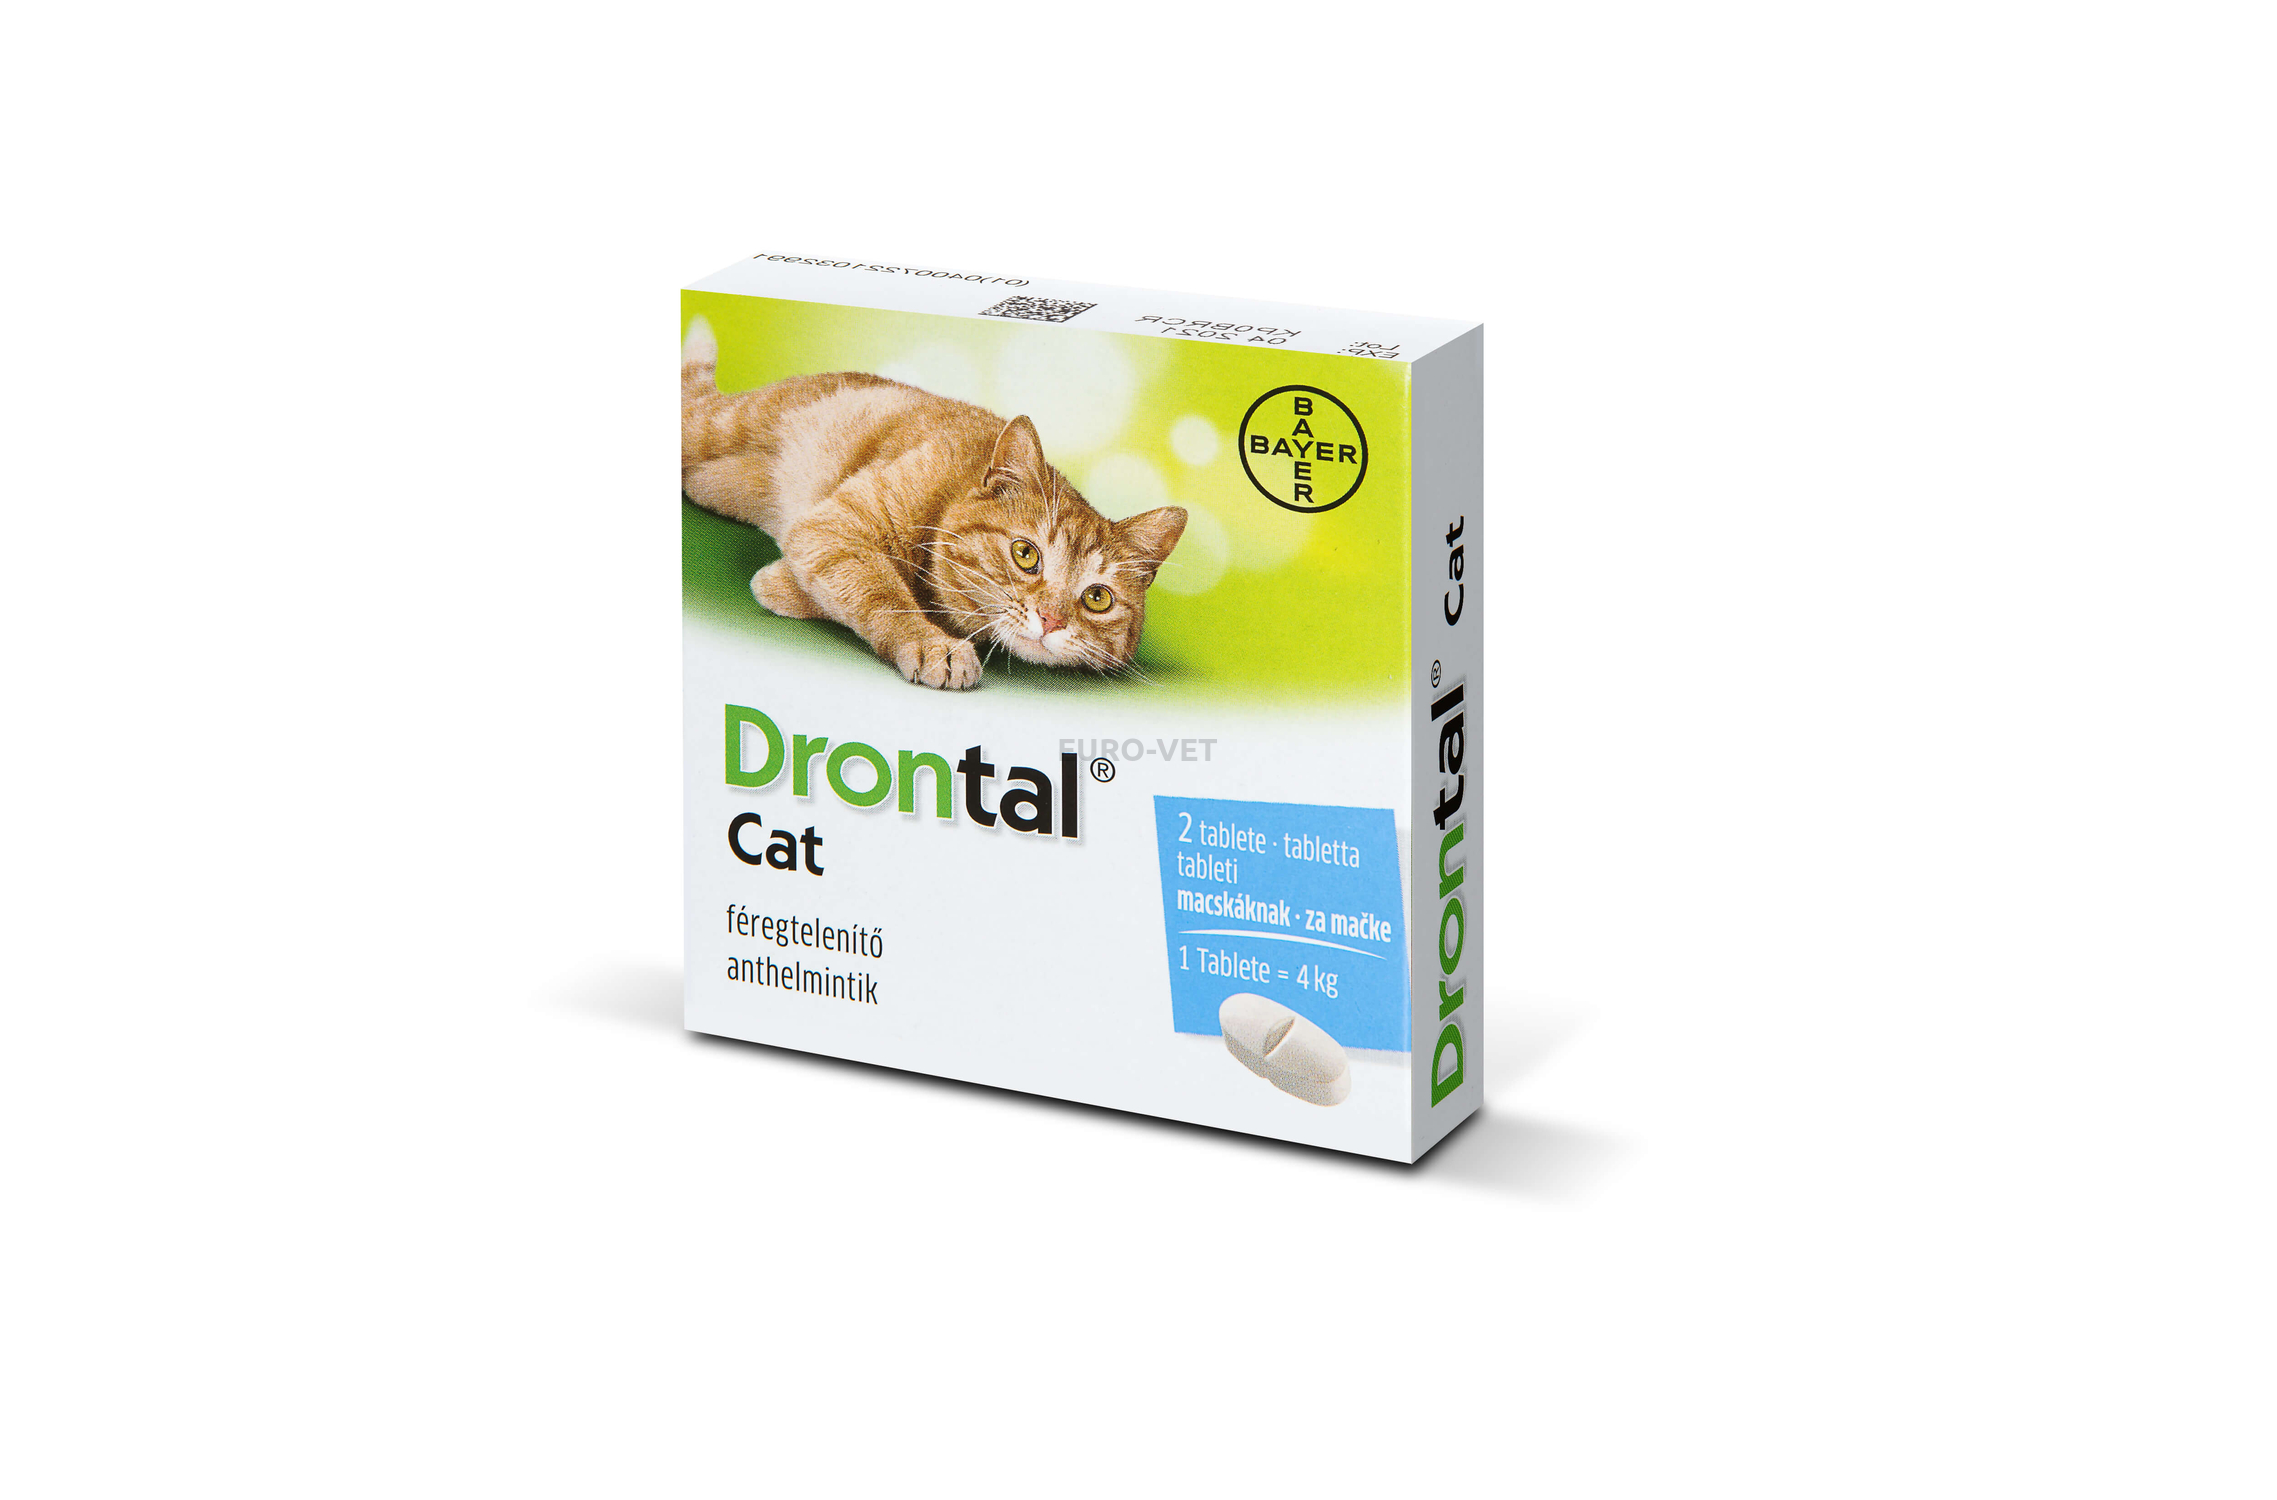 Pyrantel Pamoate Dosage Chart For Cats